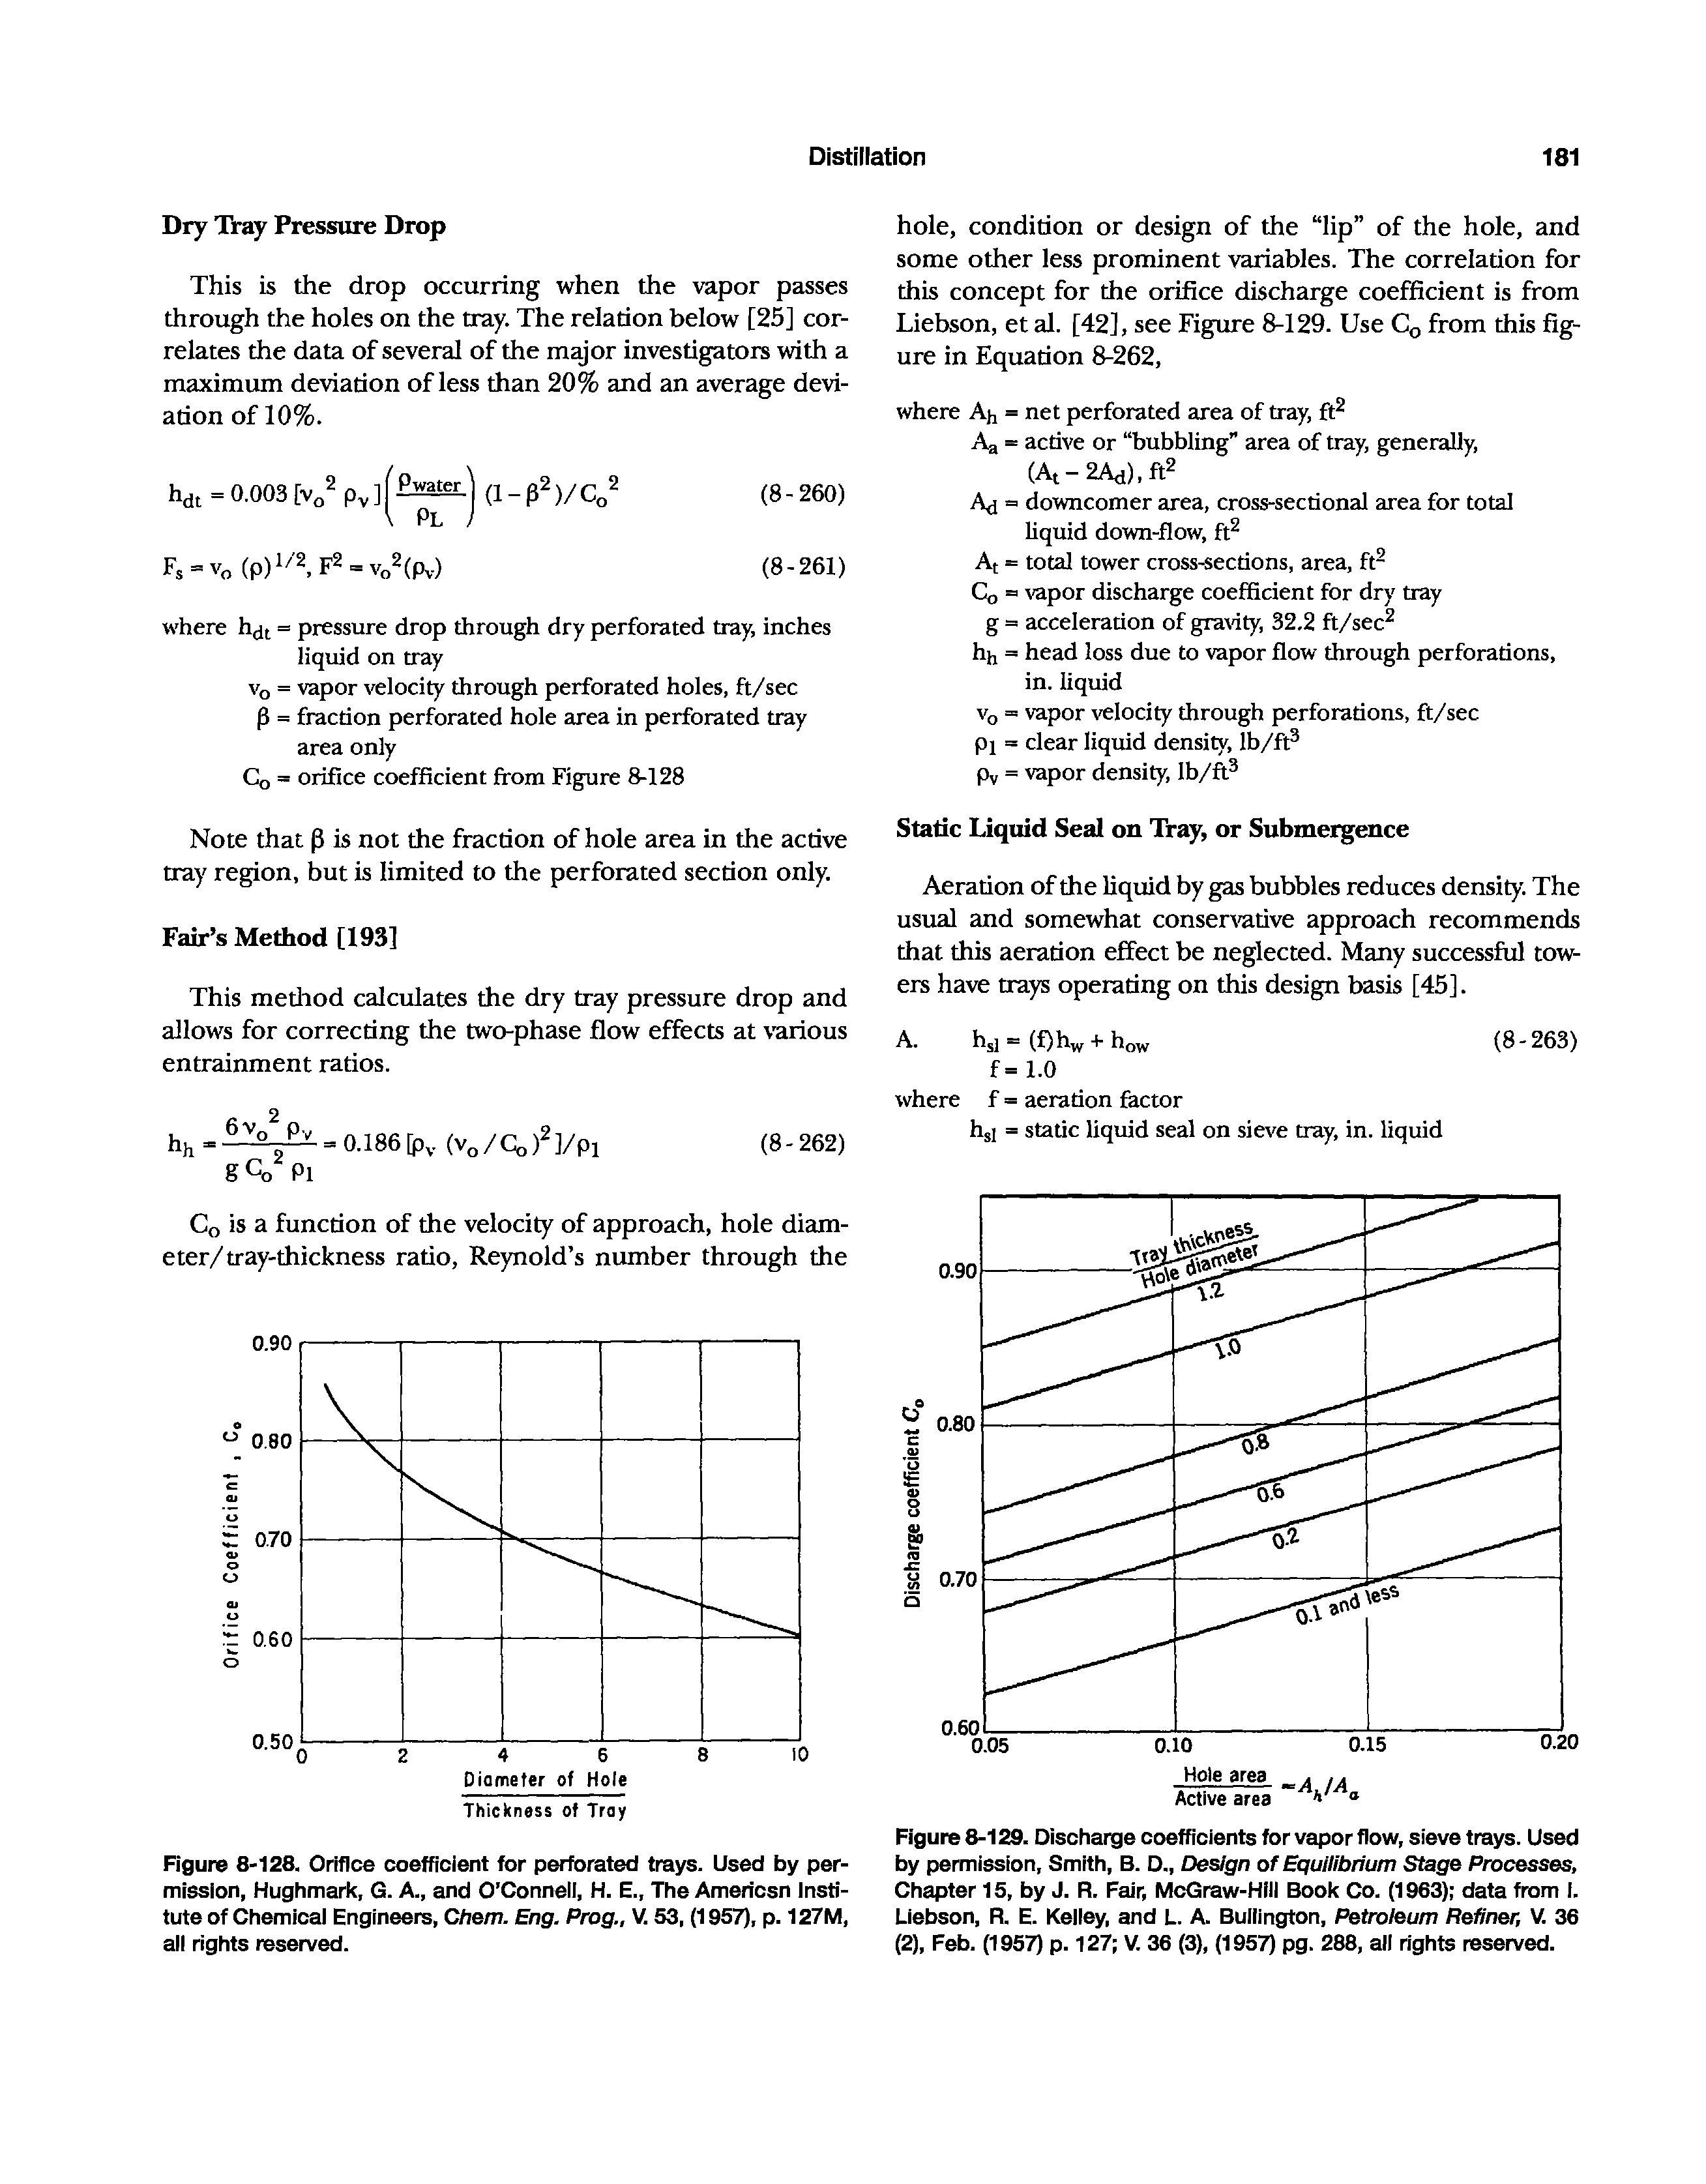 Figure 8-128. Orifice coefficient for perforated trays. Used by permission, Hughmark, G. A., and O Connell, H. E., The Americsn Institute of Chemical Engineers, Chem. Eng. Prog., V. 53, (1957), p. 127M, all rights reserved.